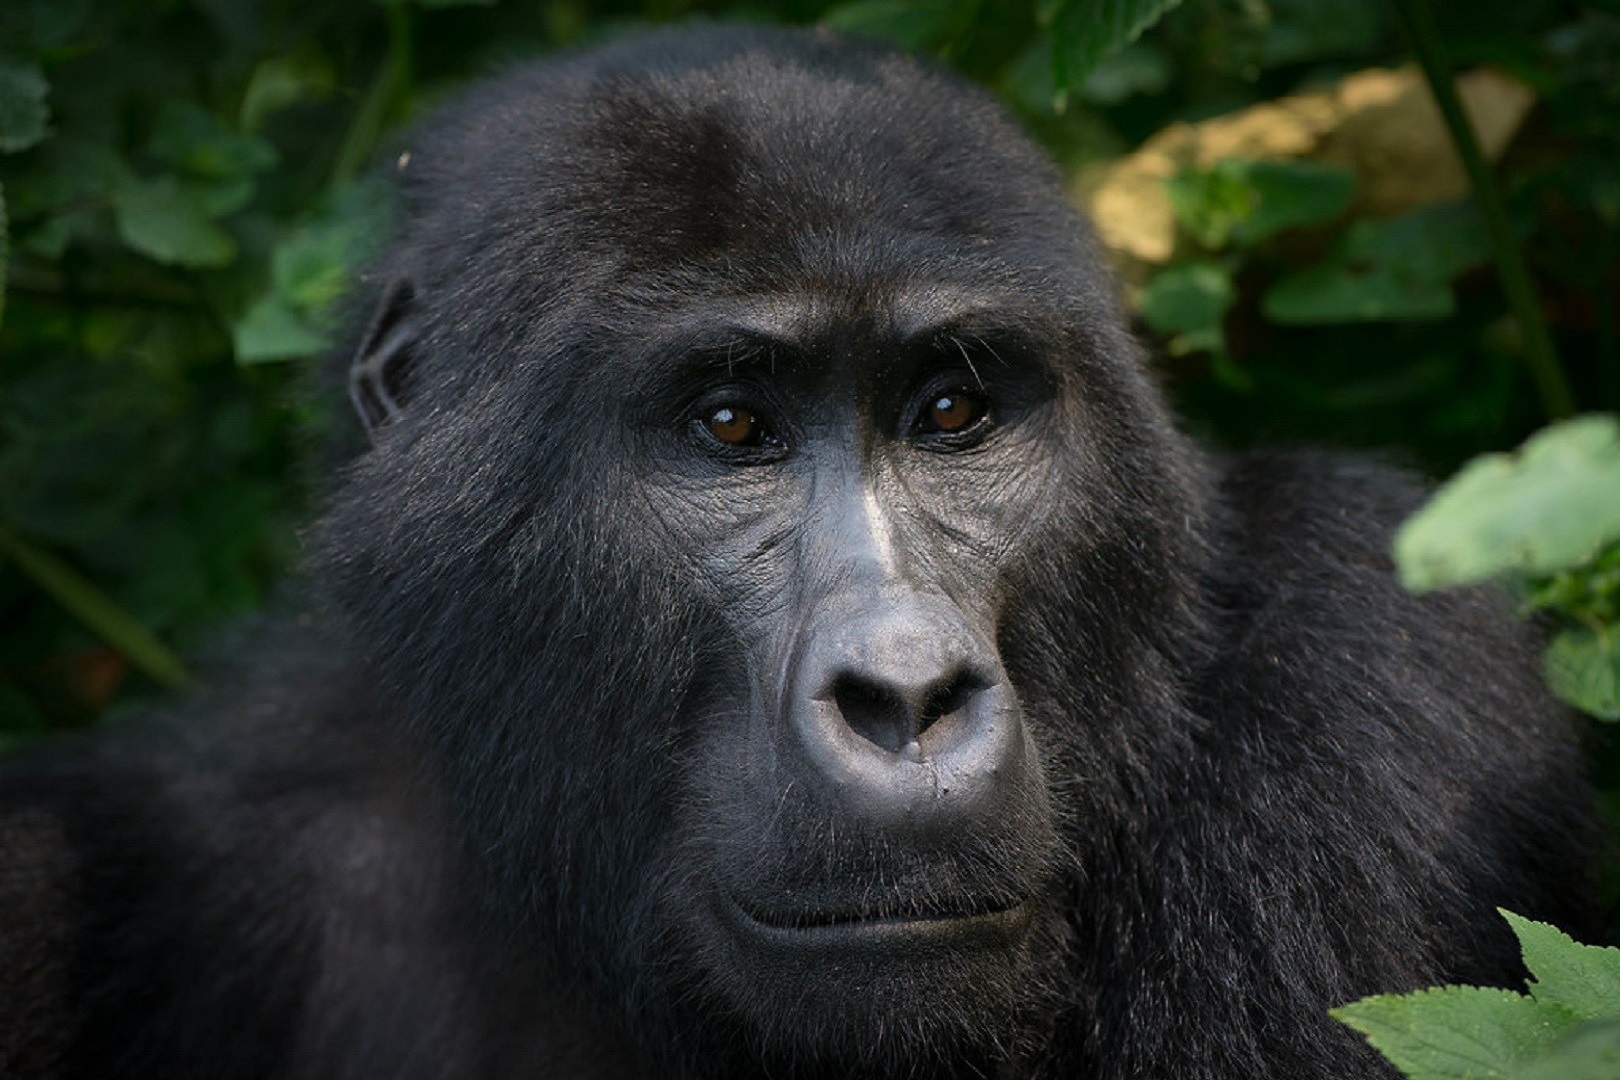 A closer view of an adult mountain gorilla in Bwindi Impenetrable National Park